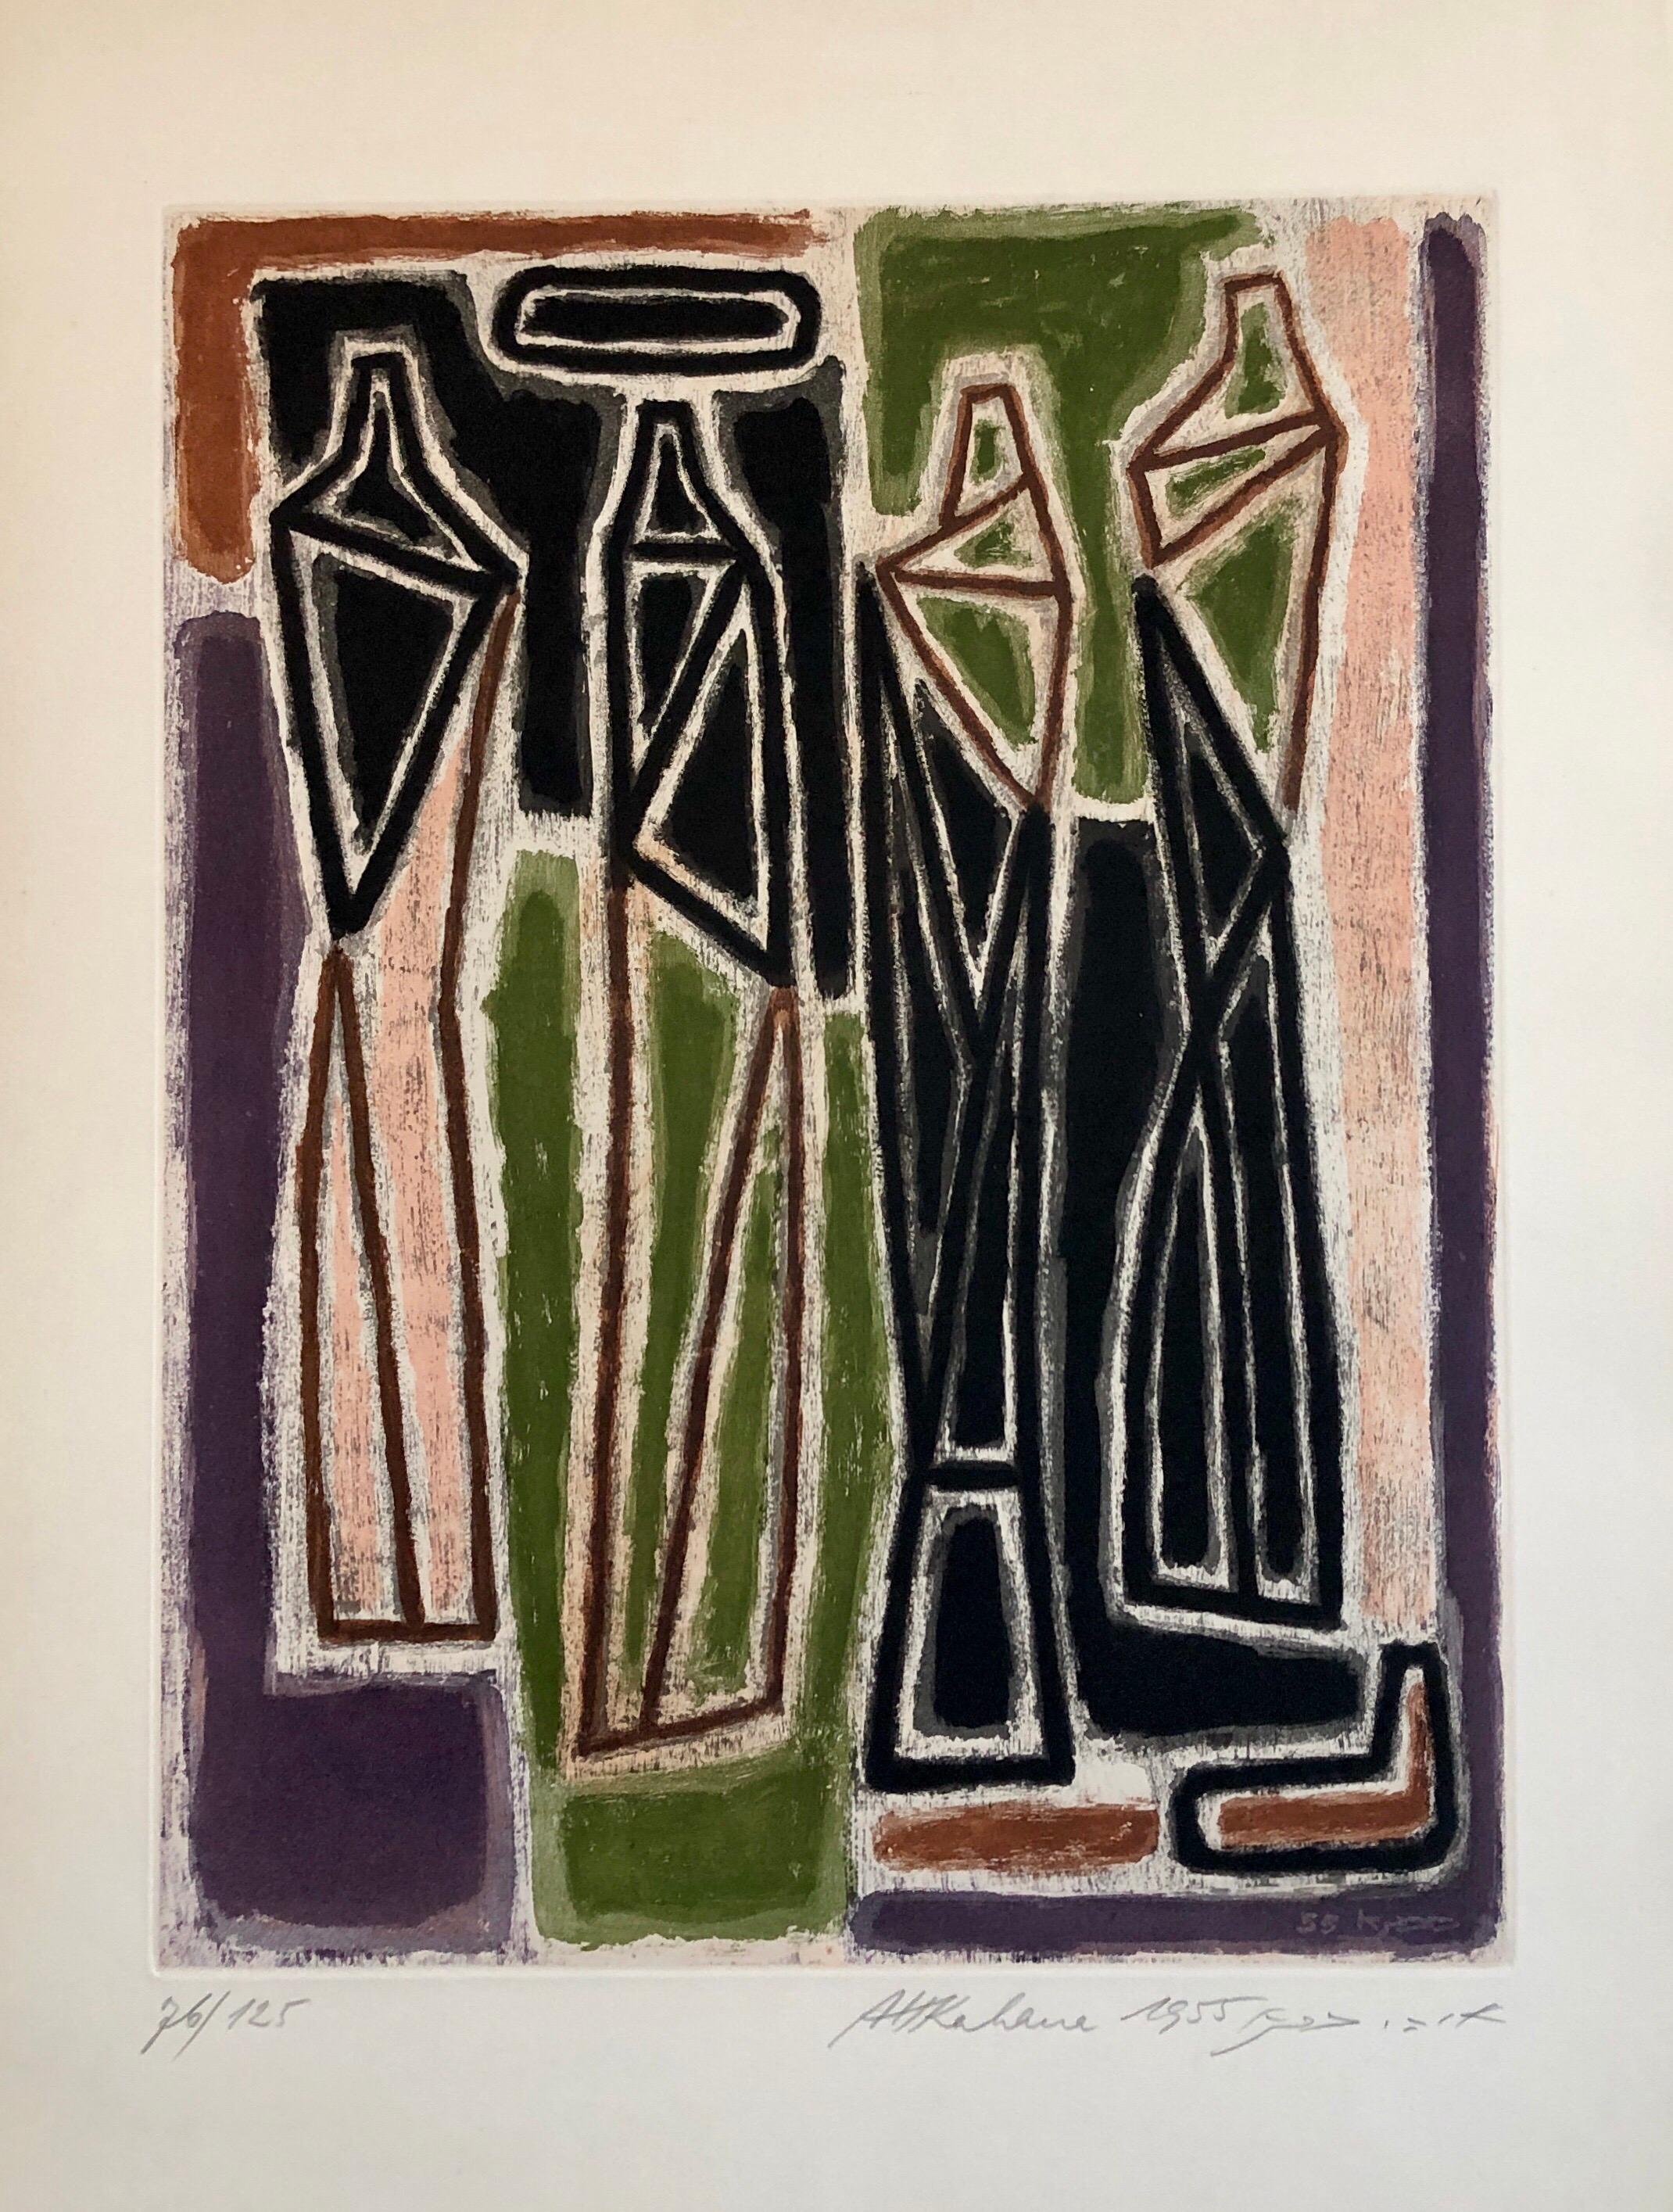 Abstract color composition, 1959 aquatint lithograph "the Master and his Pupils".
This was from a portfolio which included works by Yosl Bergner, Menashe Kadishman, Yosef Zaritsky, Aharon Kahana, Jacob Wexler, Moshe Tamir and Michael Gross.

Aharon